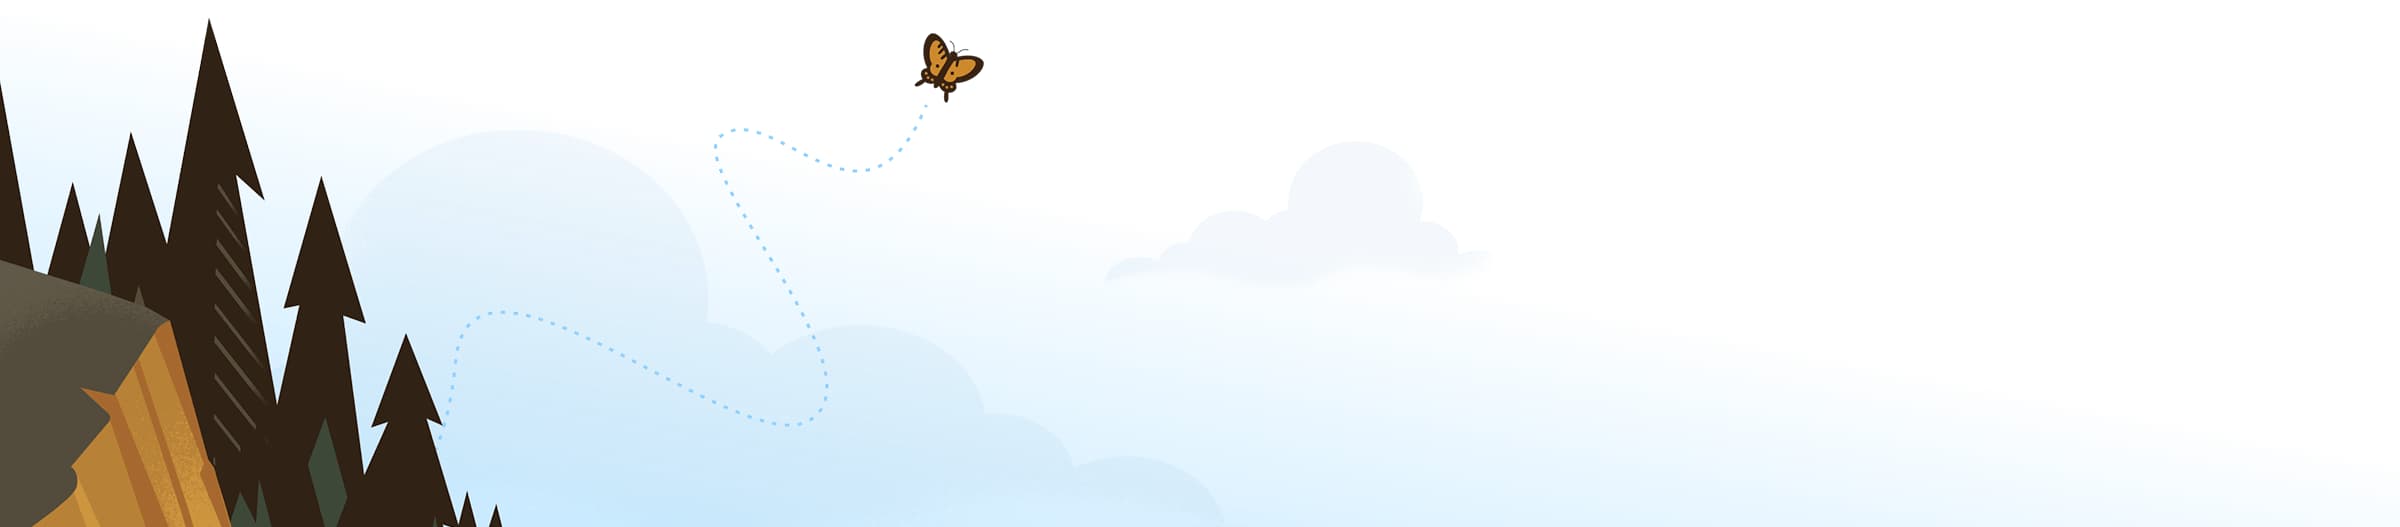 A butterfly flying over a mountain vista.